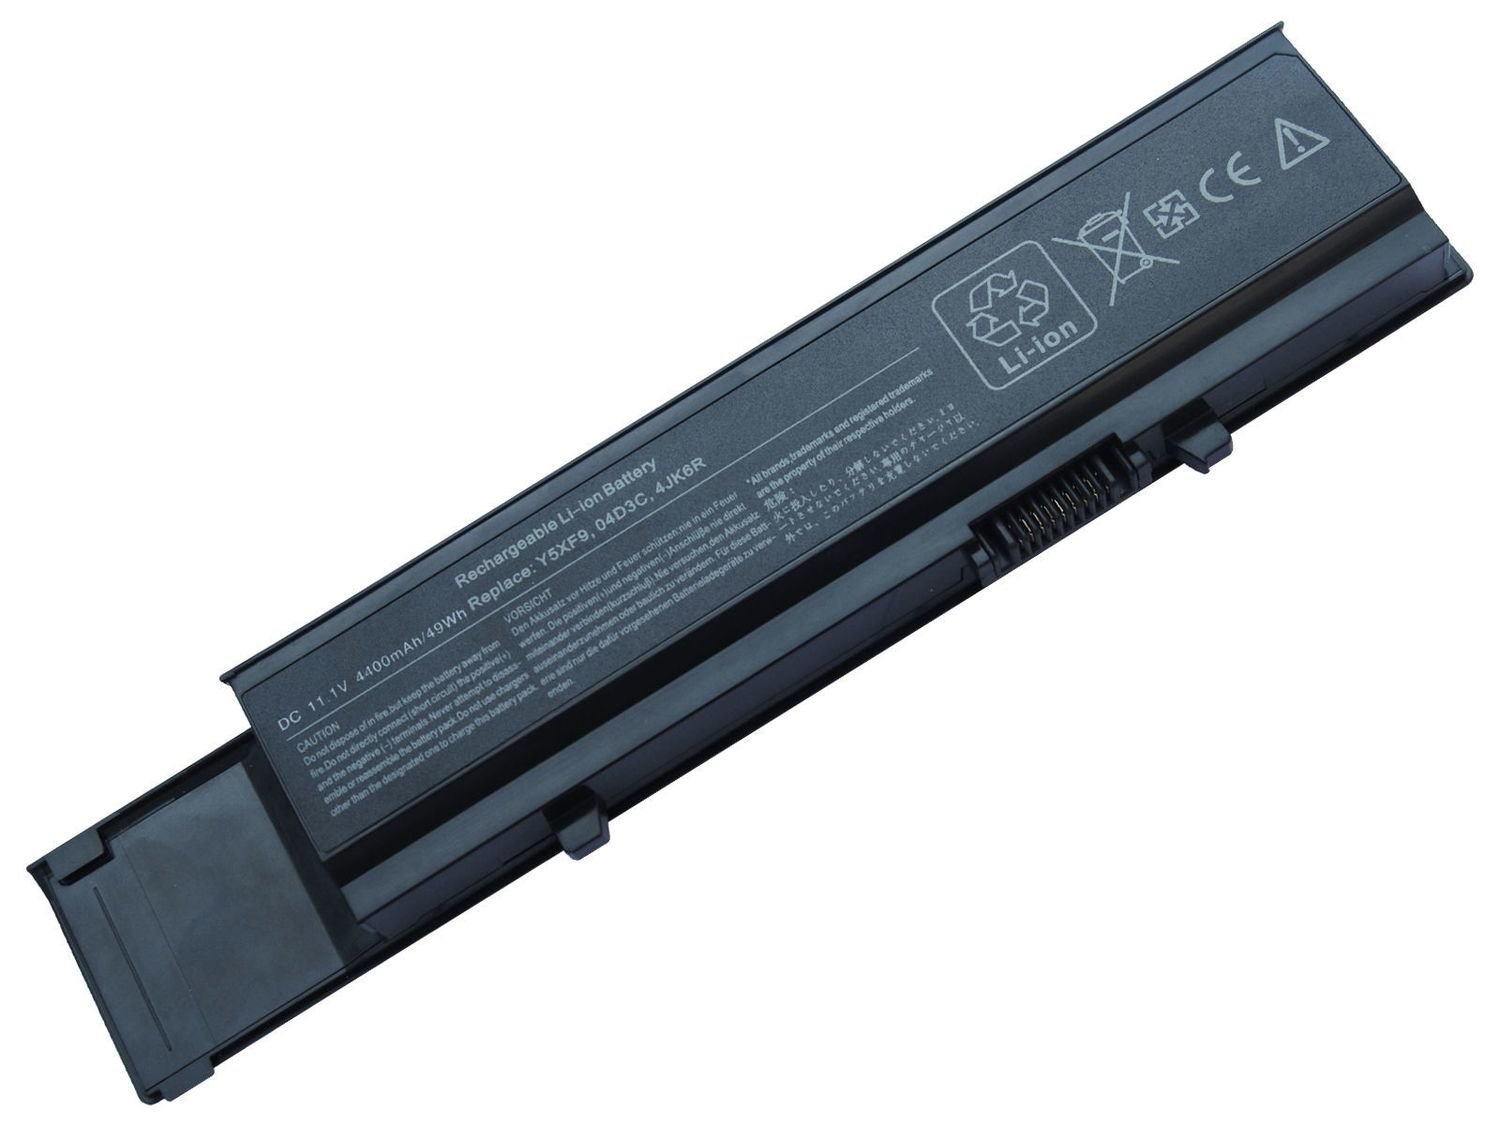 Compatible for Dell vostro 3400, 3500, 3700 laptop battery